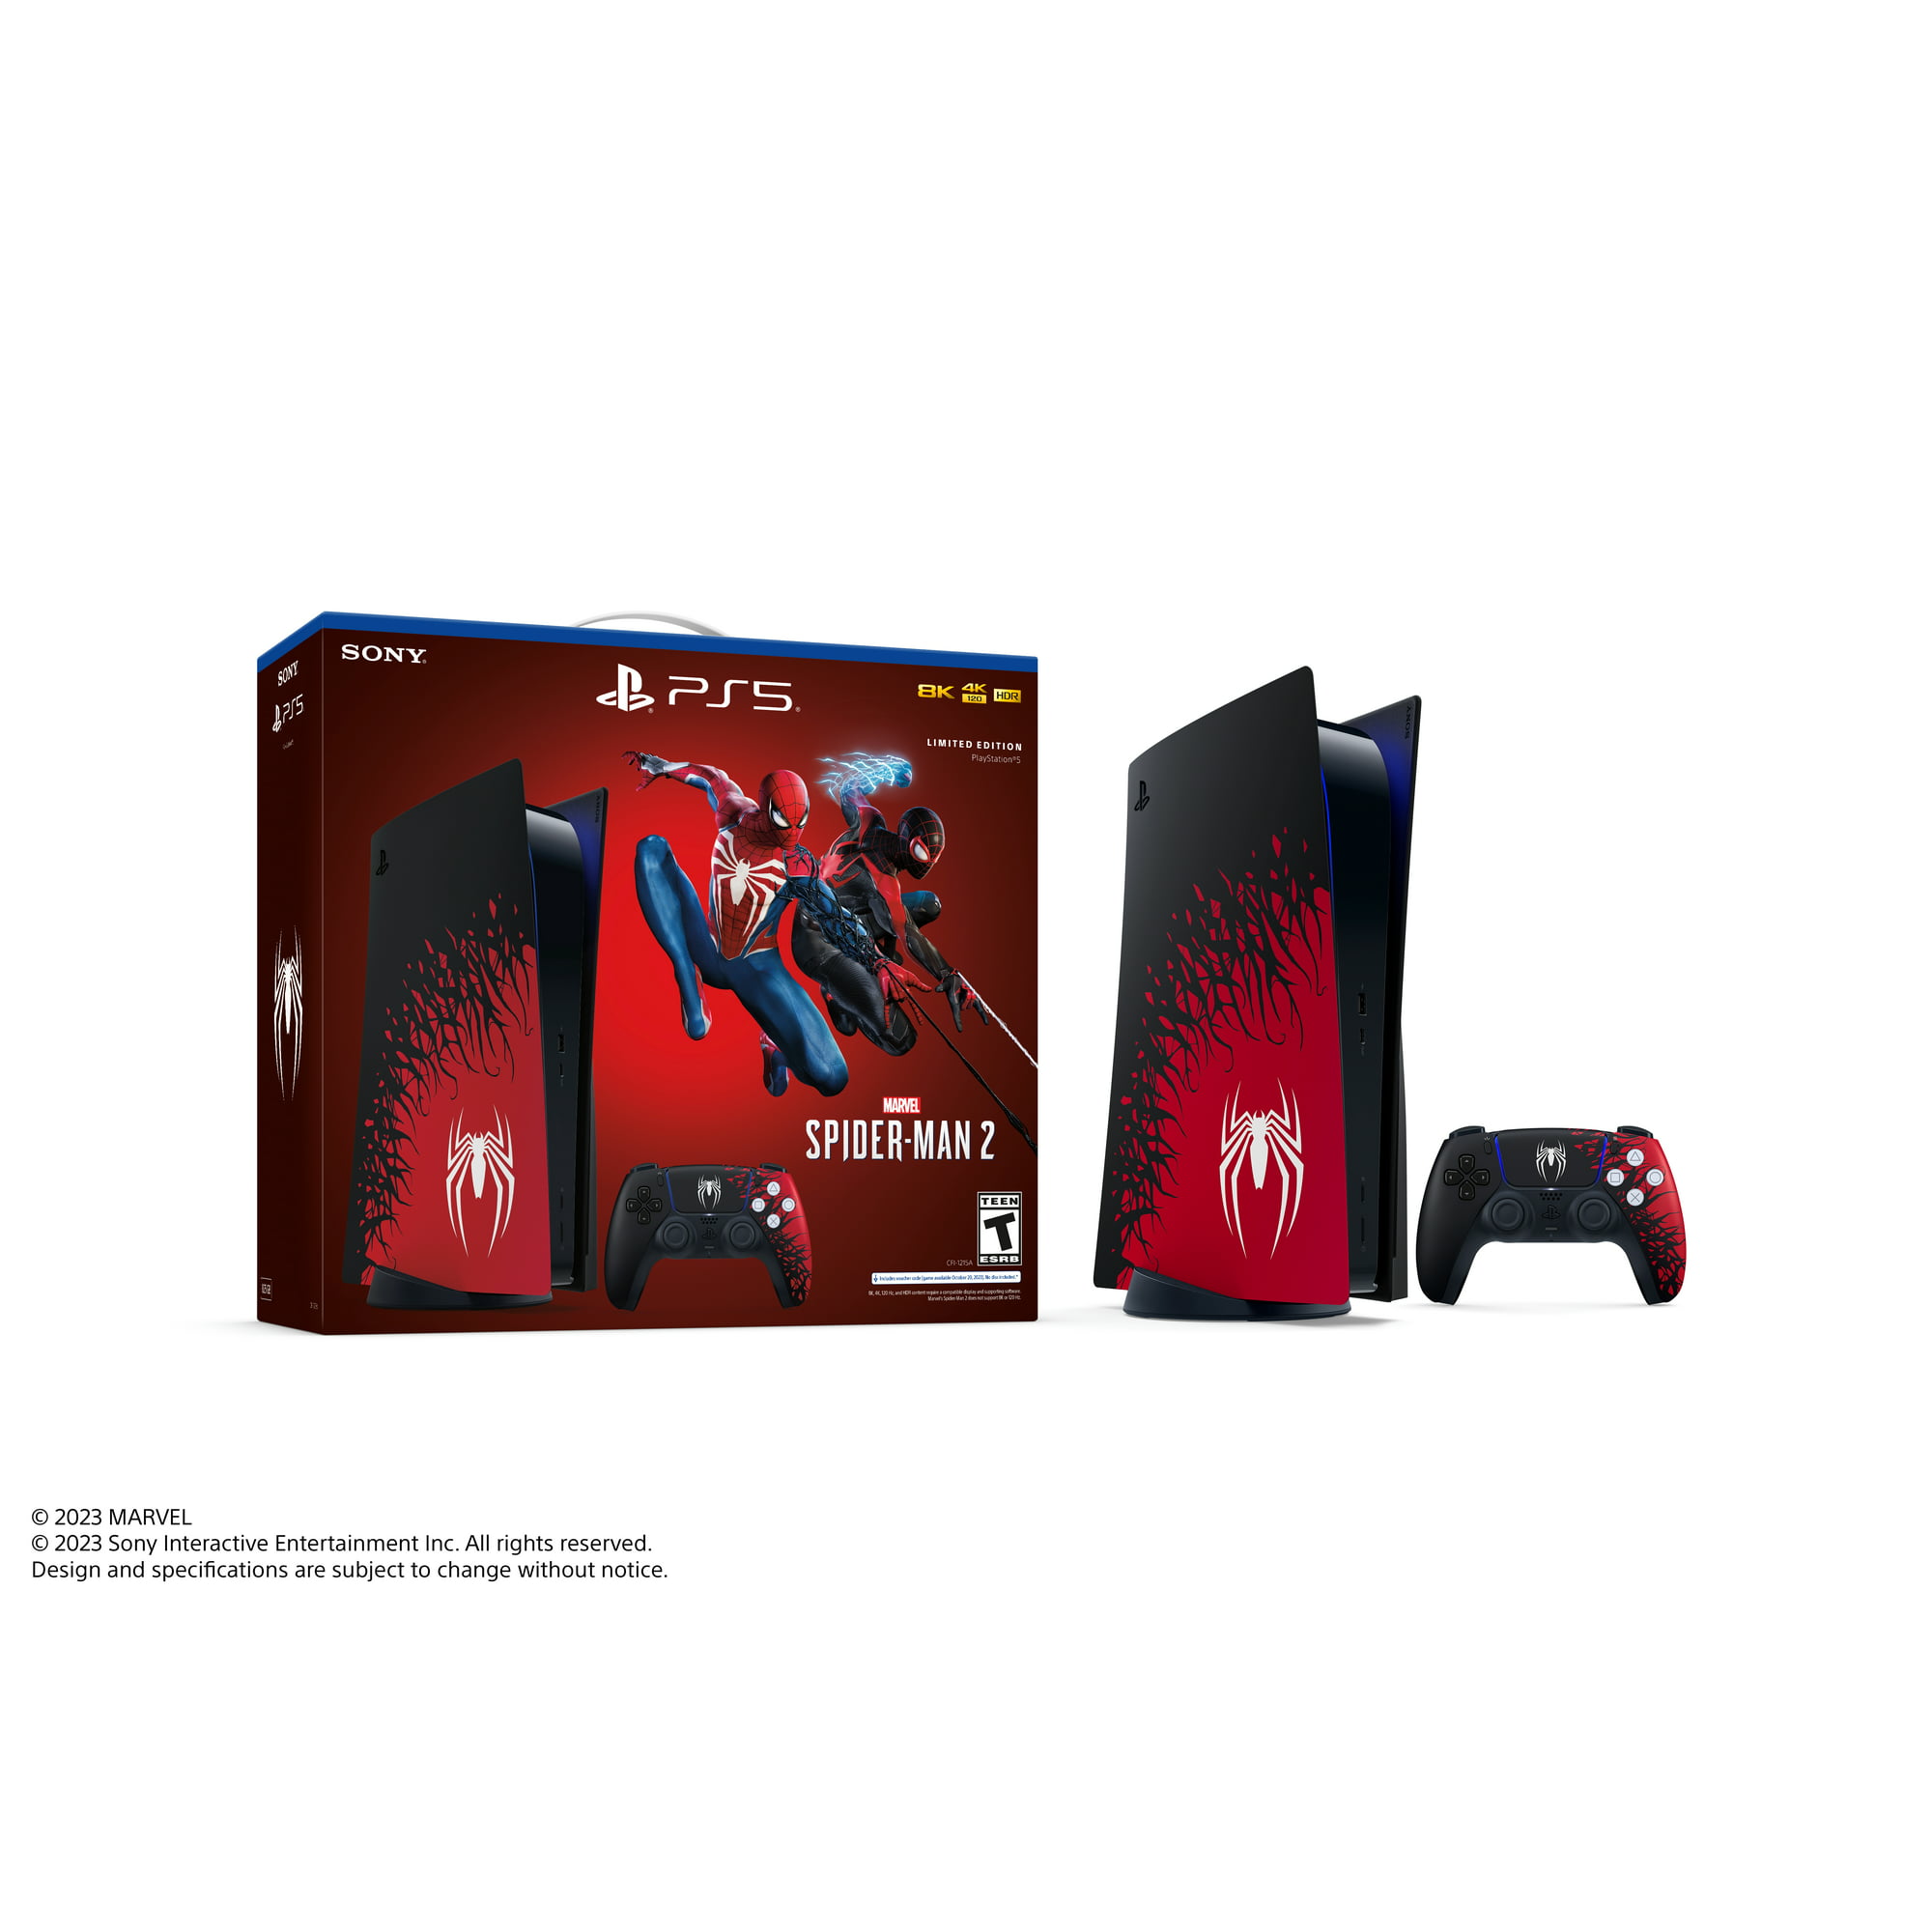 Sony PS5 Spider-man 2 Bundle Staples Clearance $349  In Store & YMMV